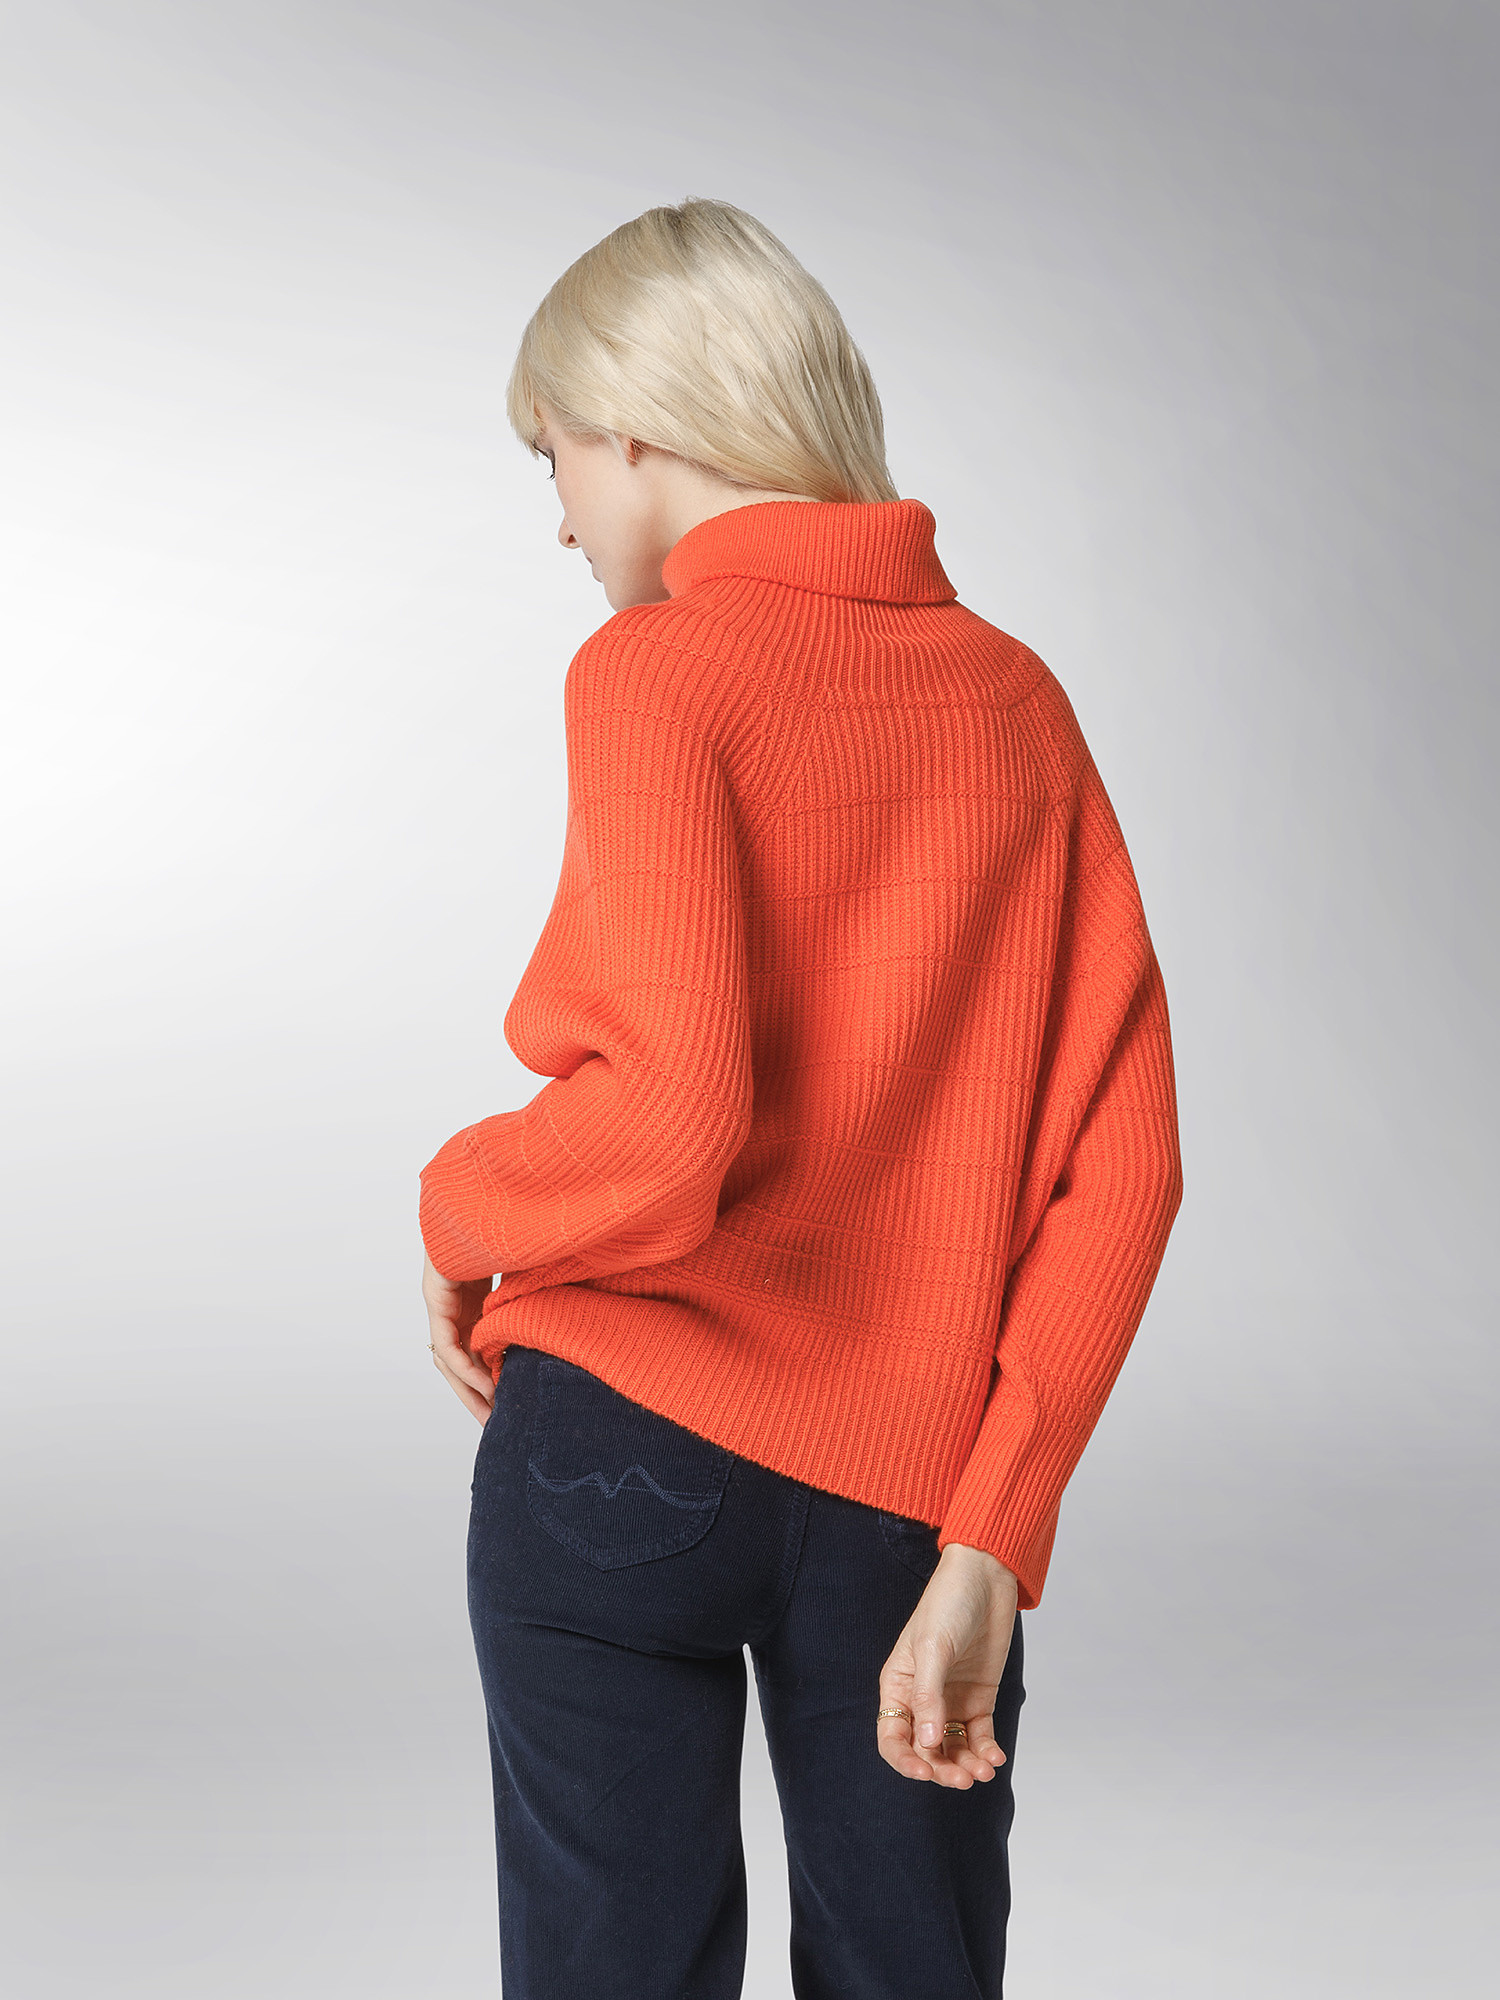 K Collection - Pullover dolcevita, Arancione, large image number 4